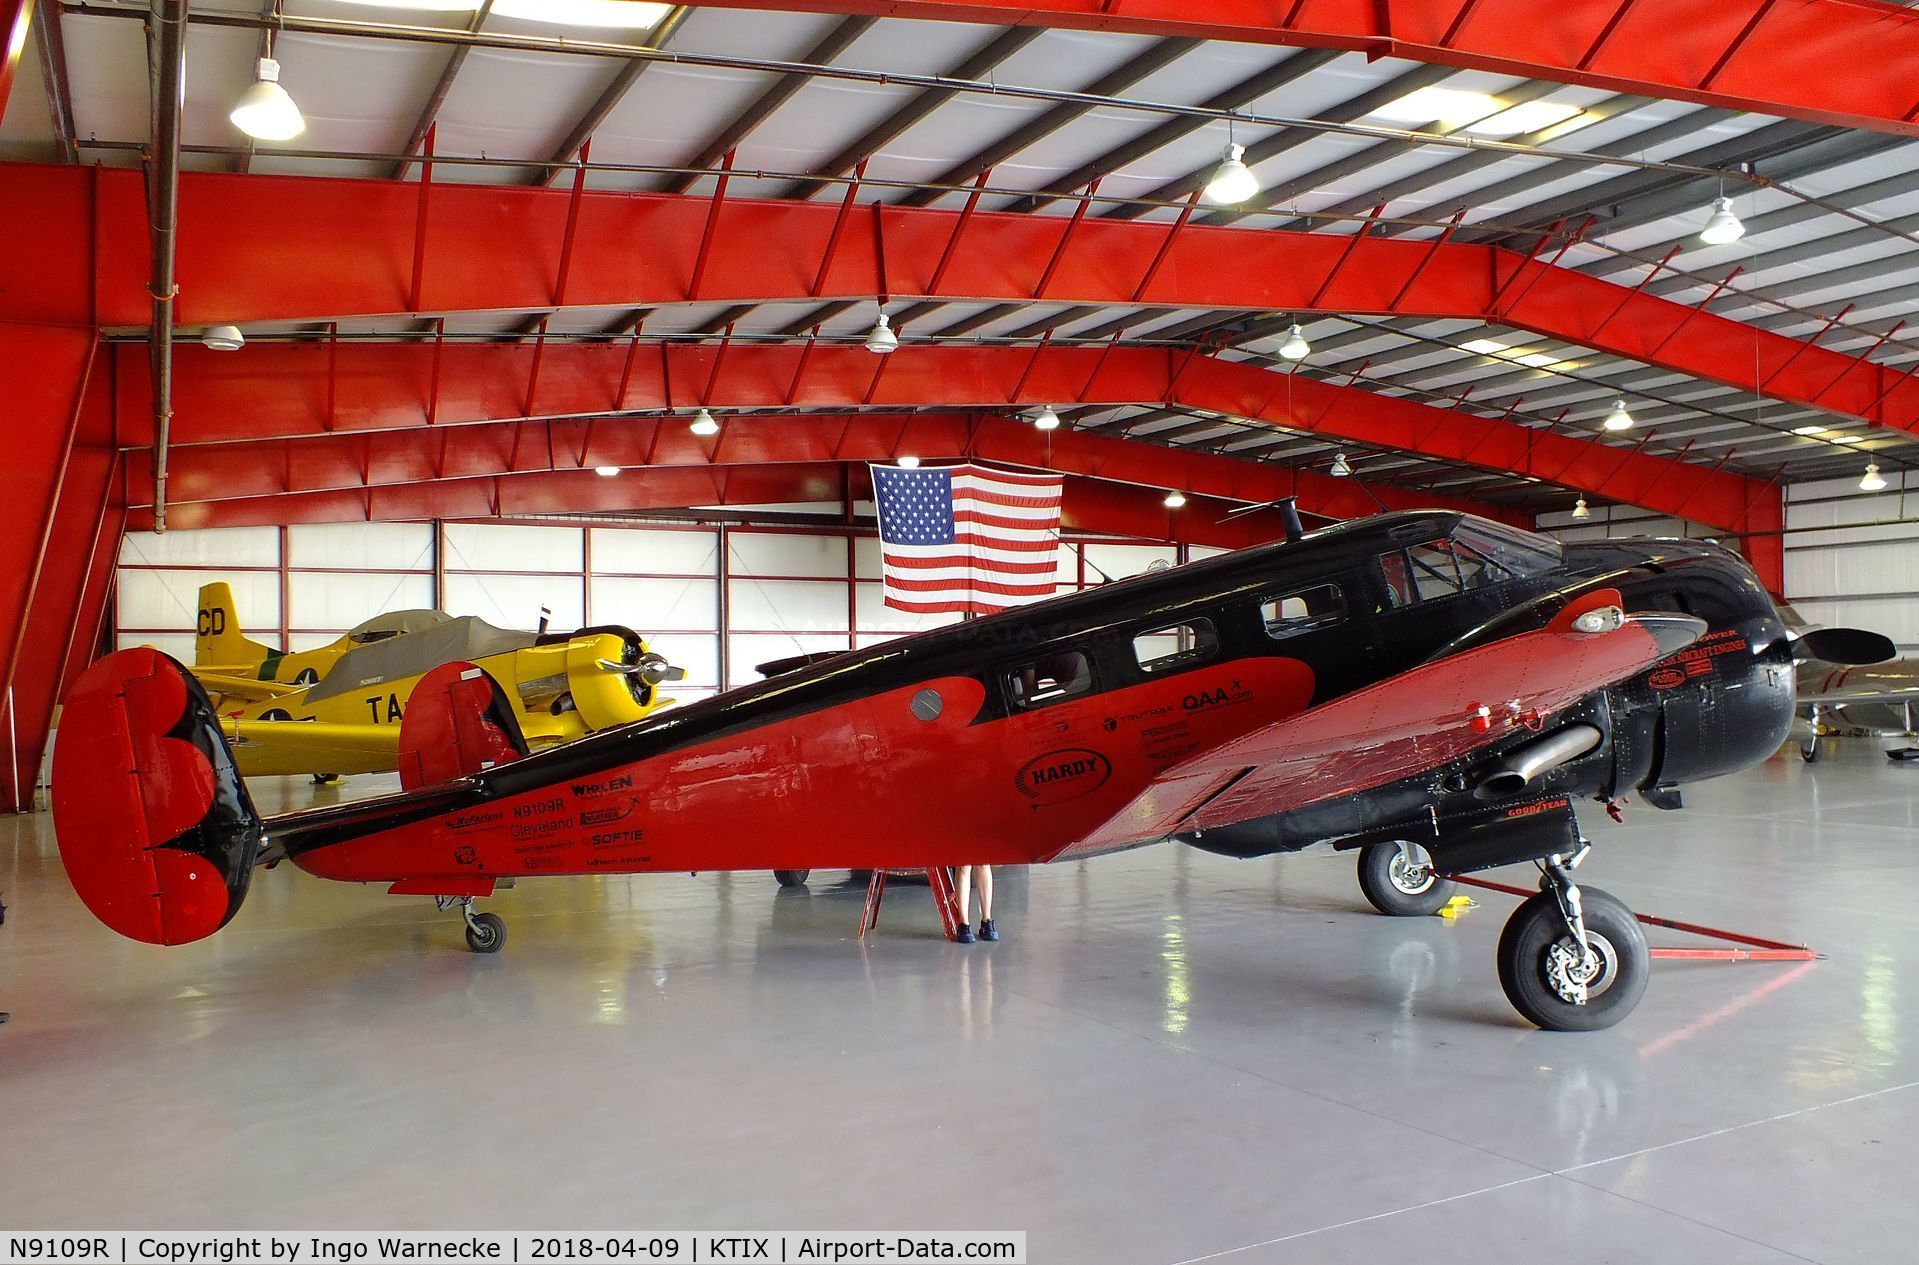 N9109R, 1943 Beech C18S (AT-7C) C/N 4383 (5676), Beechcraft C18S Twin Beech at Space Coast Regional Airport, Titusville (the day after Space Coast Warbird AirShow 2018)